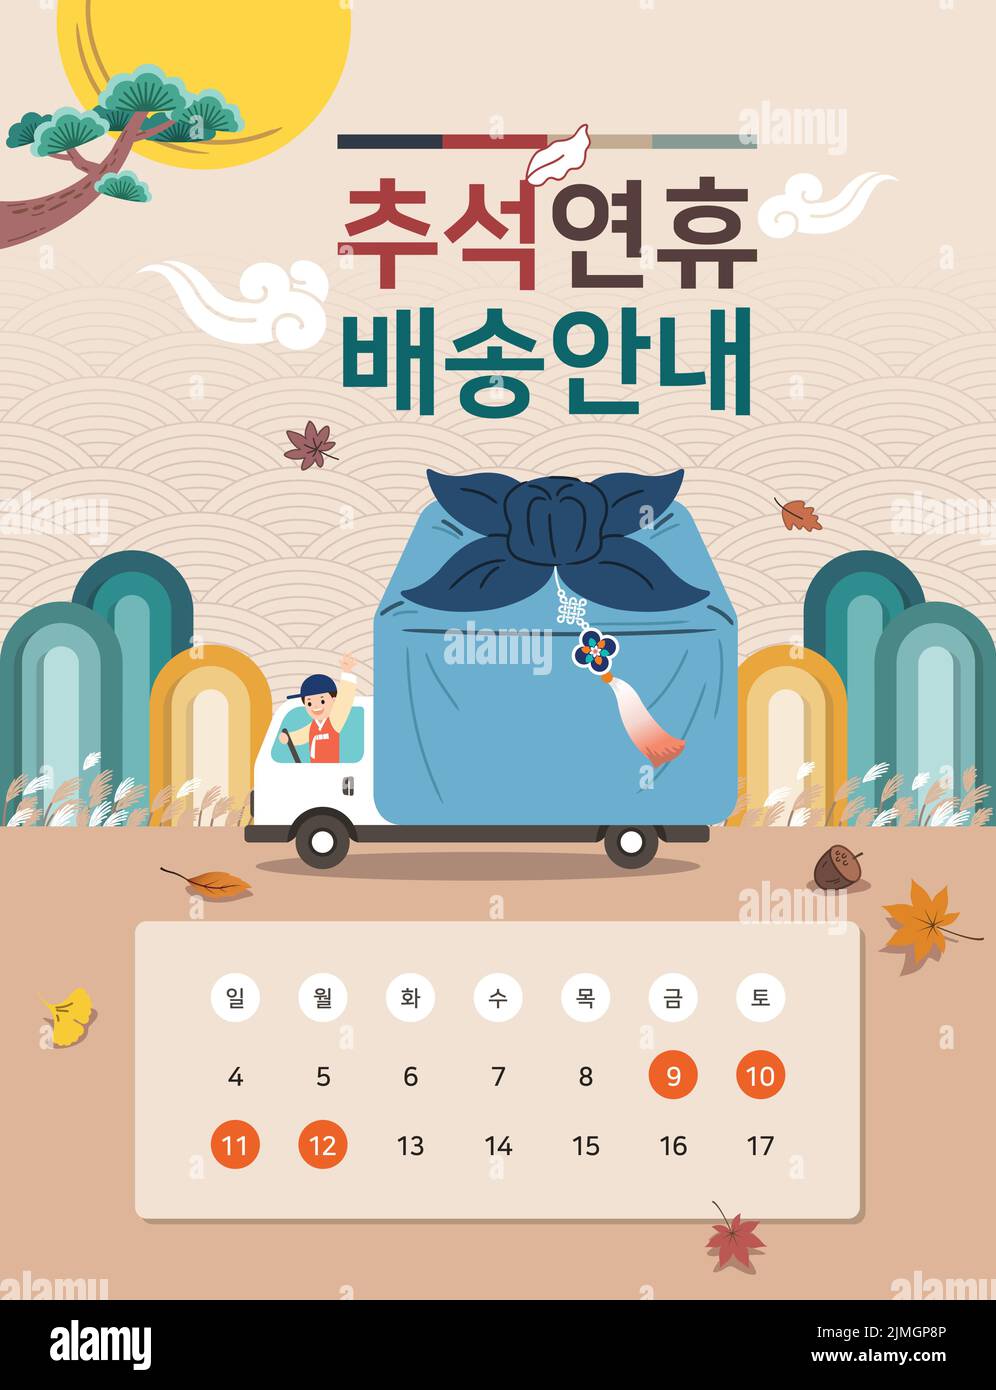 Korean Thanksgiving Day event design. A truck delivering traditional gifts. Thanksgiving holiday shipping guide, Korean translation. Stock Vector